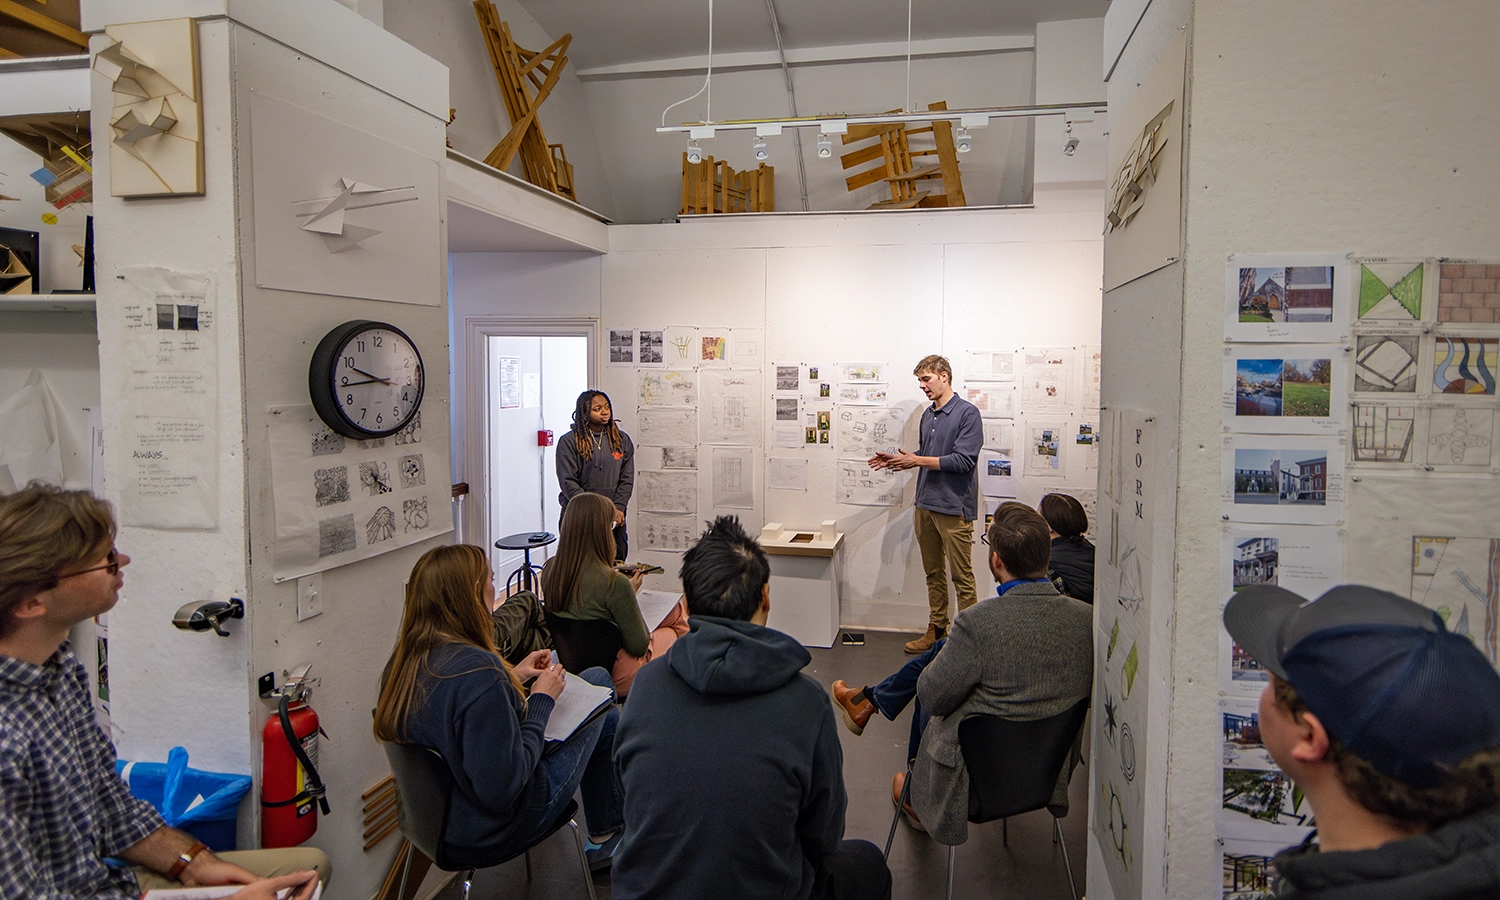 During “Architecture Design Studio” with Associate Professor of Art and Architecture Gabriela D’Angelo, Shante Frank ’25 and Cooper Robards ’24 present their redesign of 42 Geneva St. to City of Geneva staff.